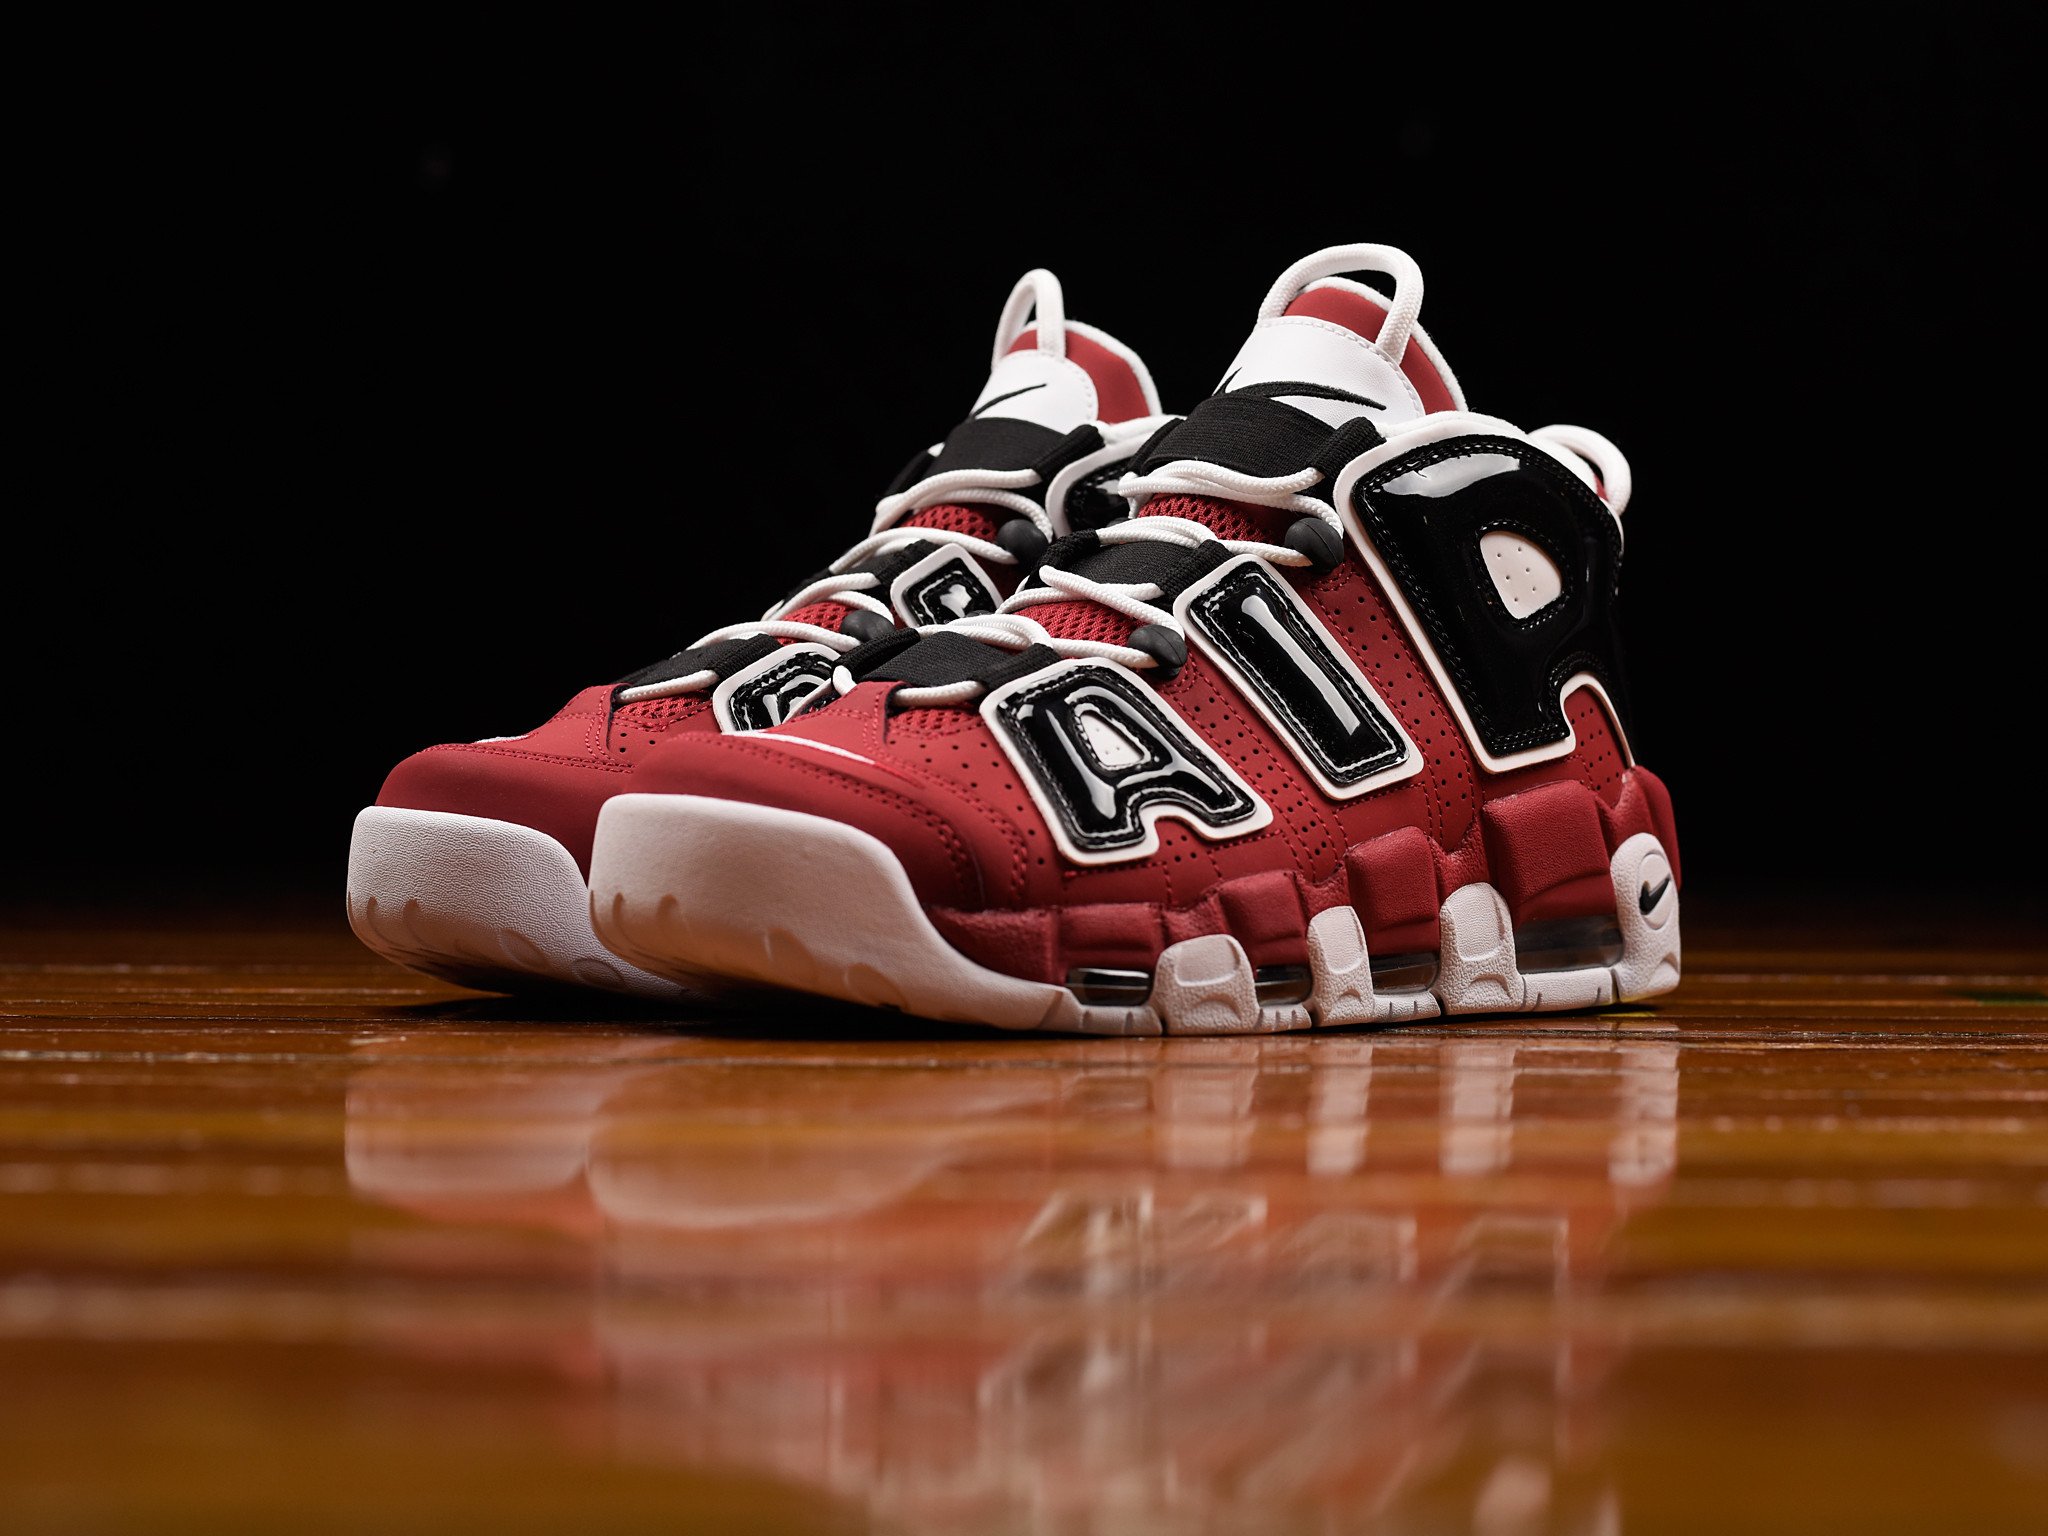 Nike air more uptempo red. Nike Air Uptempo 96. Nike Air more Uptempo 96. Кроссовки Nike Air more Uptempo ‘96. Nike Air more Uptempo 96 bulls.